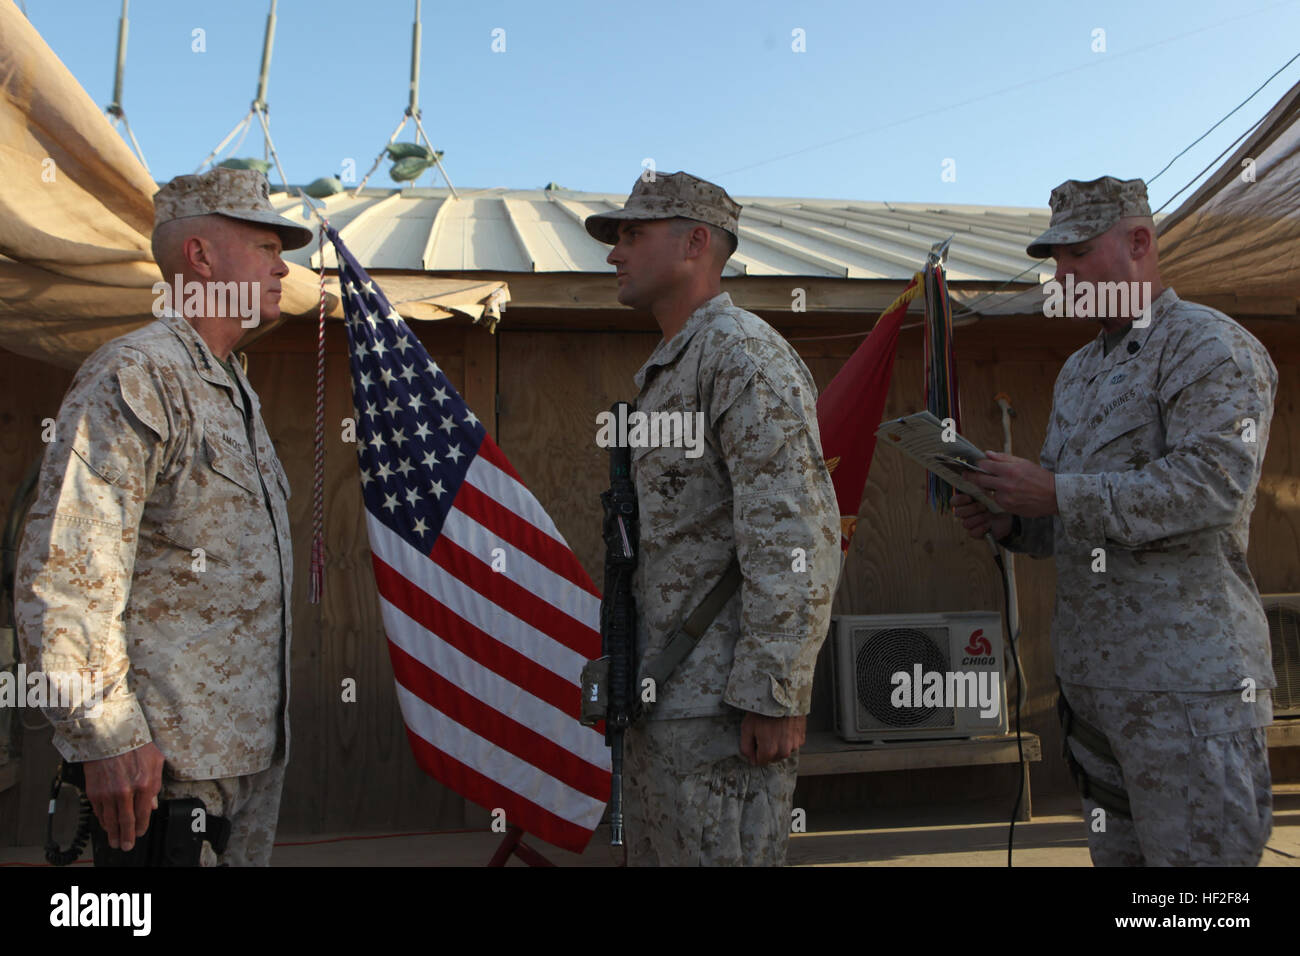 Sergeant Maj. Micheal Barrett, right, the 17th Sergeant Major of the Marine Corps, reads the meritorious promotion warrant of Corporal Dominic Sharpsteensurina, an assault section leader with Charley Company, 1st Battalion, 7th Marine Regiment, during his meritorious promotion ceremony aboard Camp Leatherneck, Afghanistan, Sept. 6, 2014. General James F. Amos, the 35th Commandant of the Marine Corps, meritoriously promoted Sharpsteensurina, a native of Minneapolis, to the rank of sergeant during his final visit to Helmand province. Commandant, Sergeant Major of the Marine Corps visit Marines,  Stock Photo